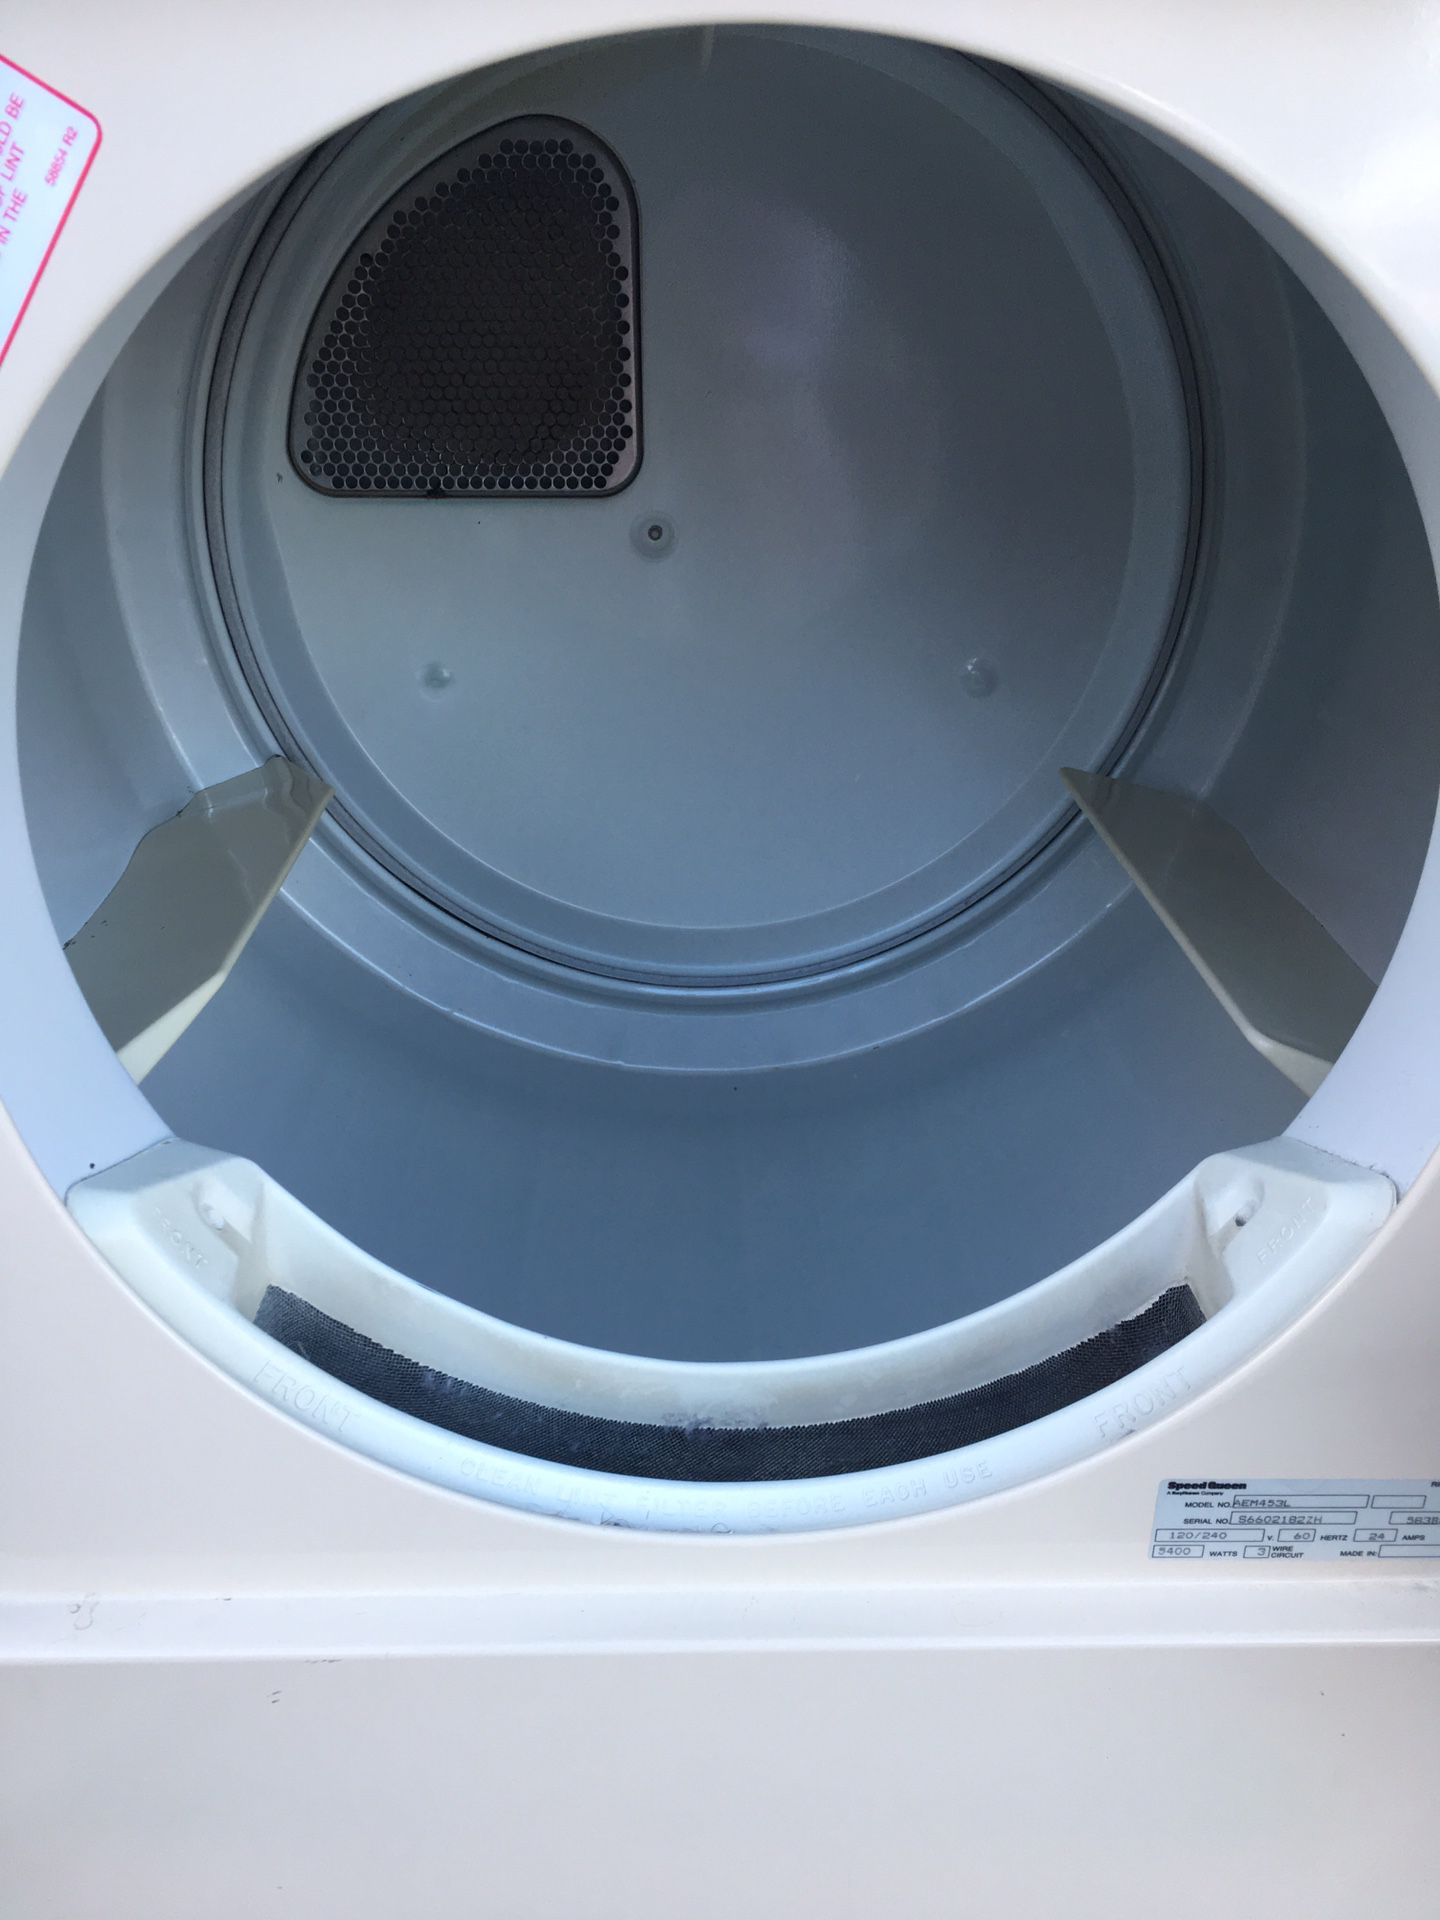 Speed queen electric dryer works awesome